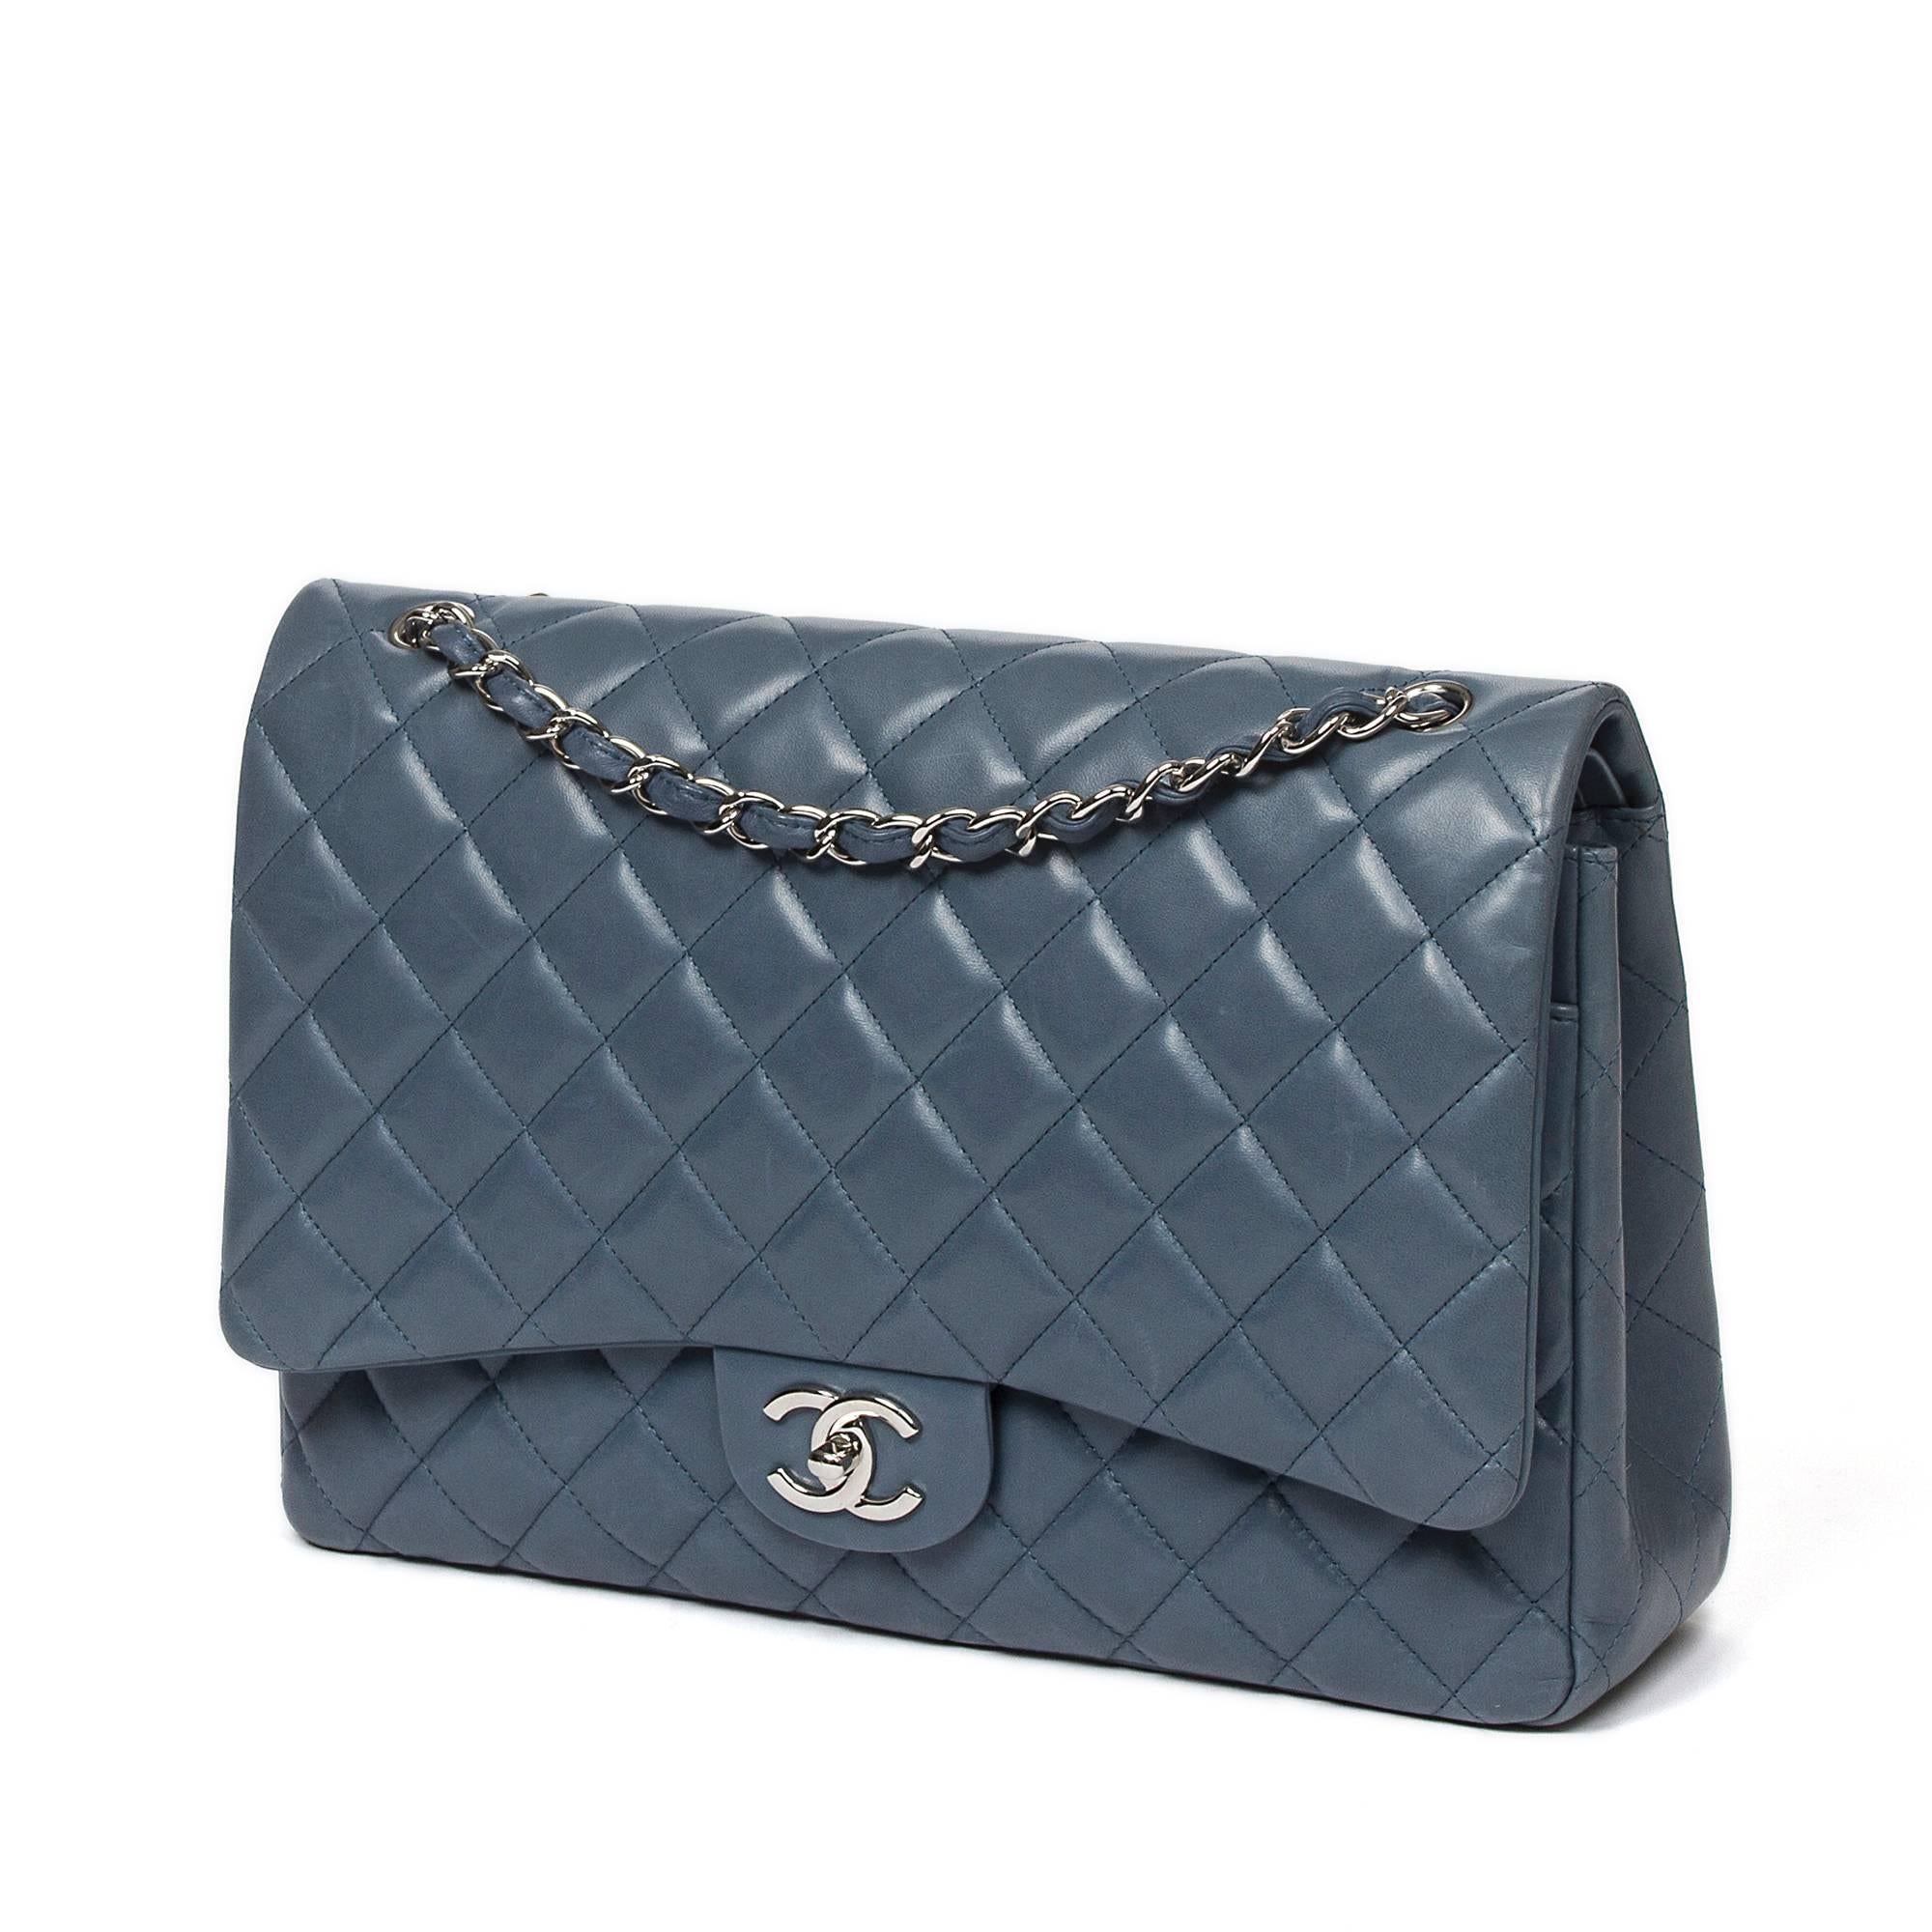 Jumbo Double Flap in grey blue quilted leather with silver tone chain strap, classic signature turnlock closure, silver tone hardware. Back slip pocket. Grey blue leather lined interior with 3 compartments. Silver tone heat stamp 